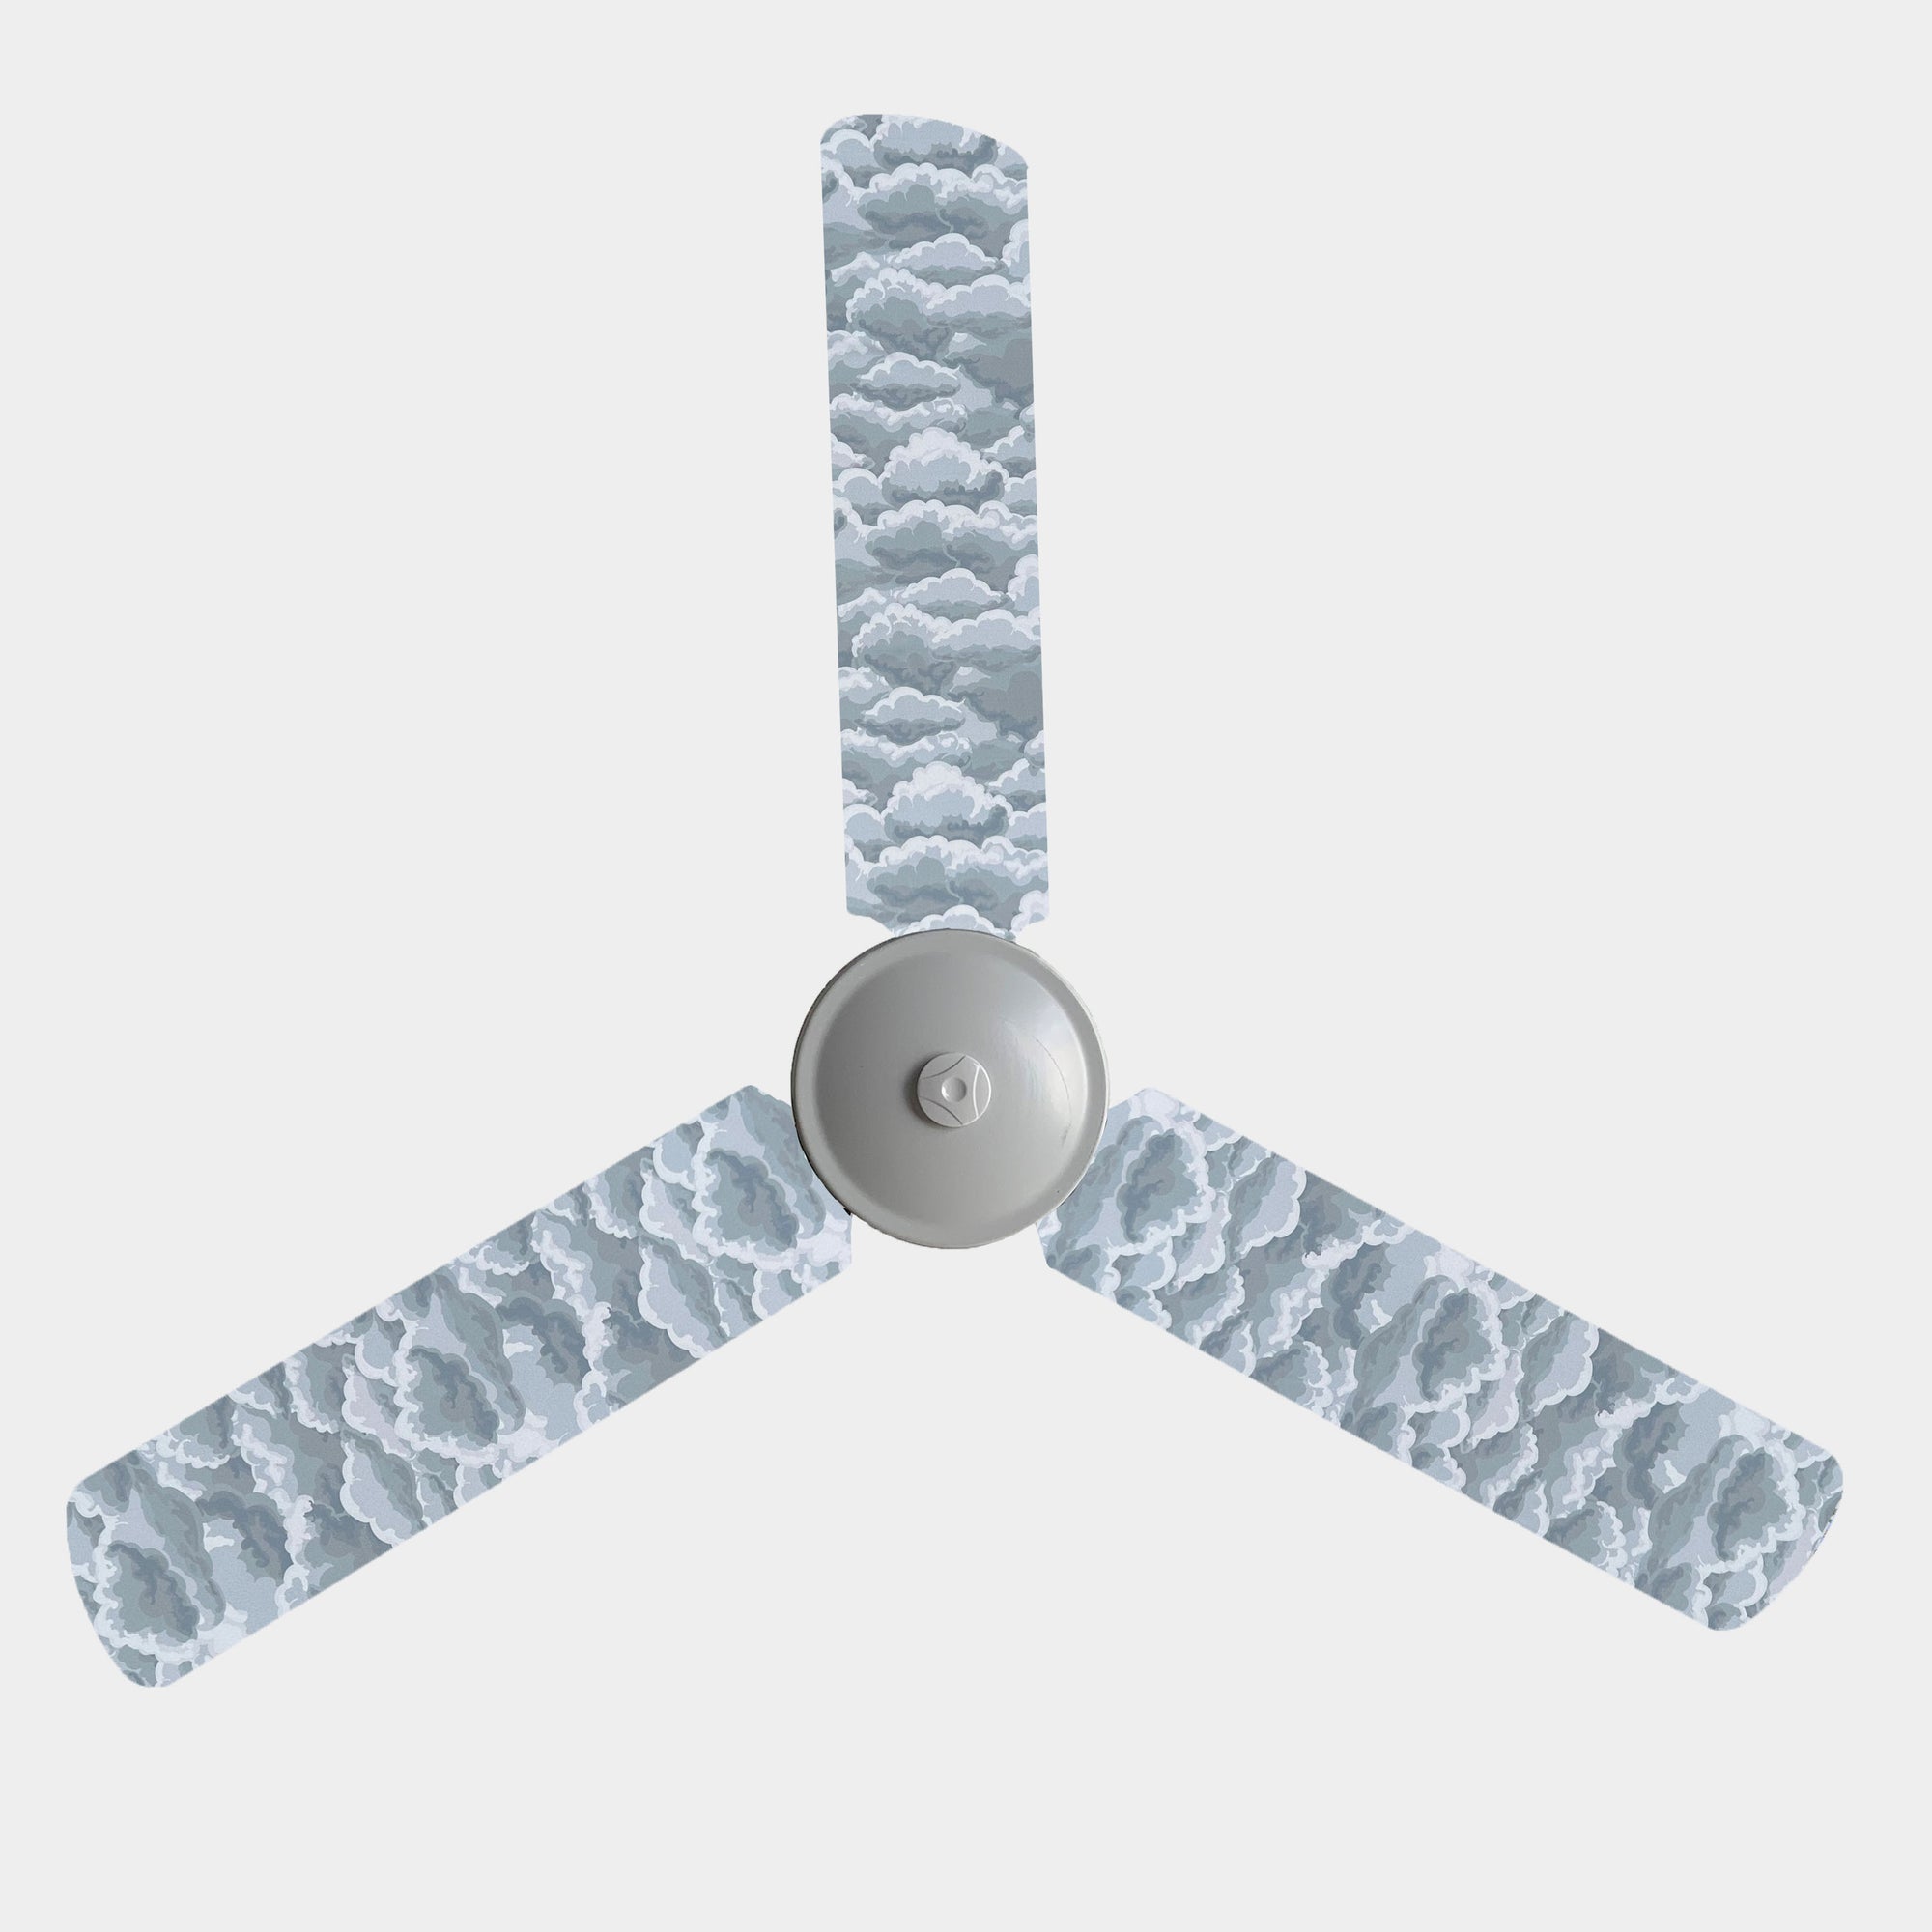 Grey and white storm cloud fan blade covers on a 3 blade fan